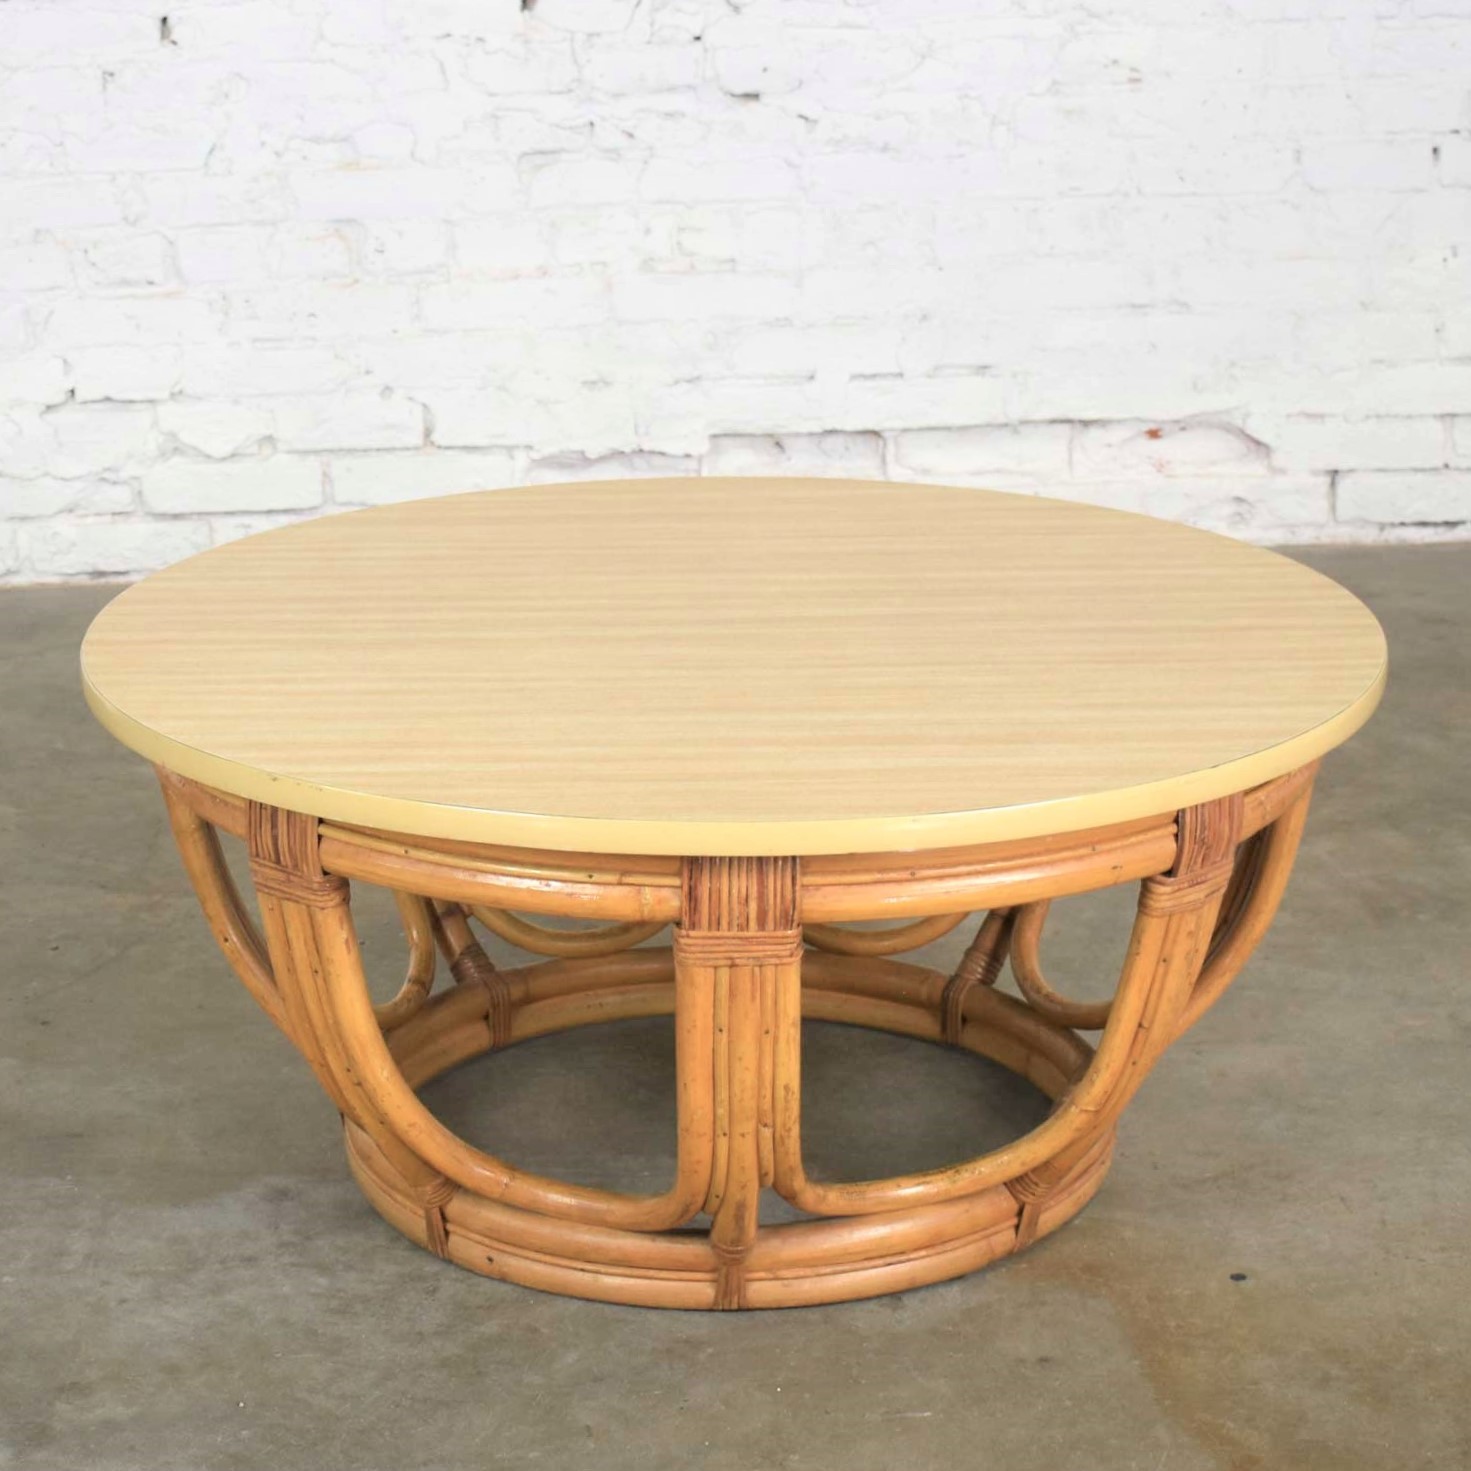 Vintage Round Rattan Drum Shape Coffee or End Table with Laminate Top